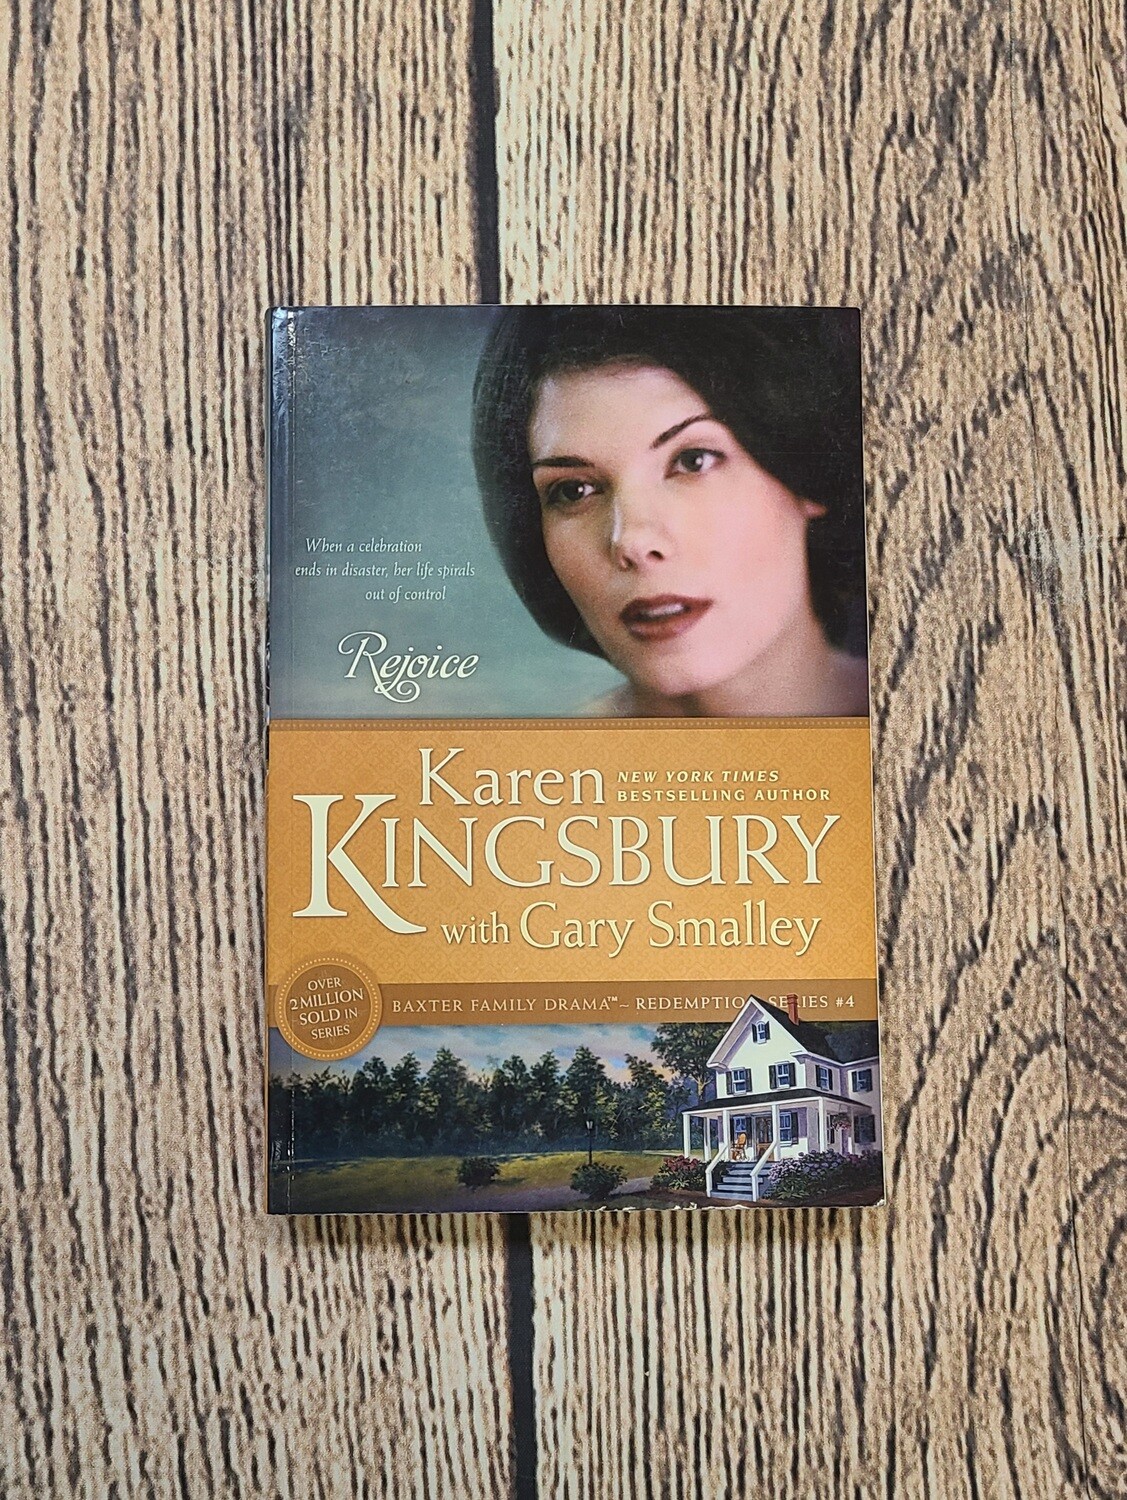 Rejoice by Karen Kingsbury with Gary Smalley - Paperback - Great Condition